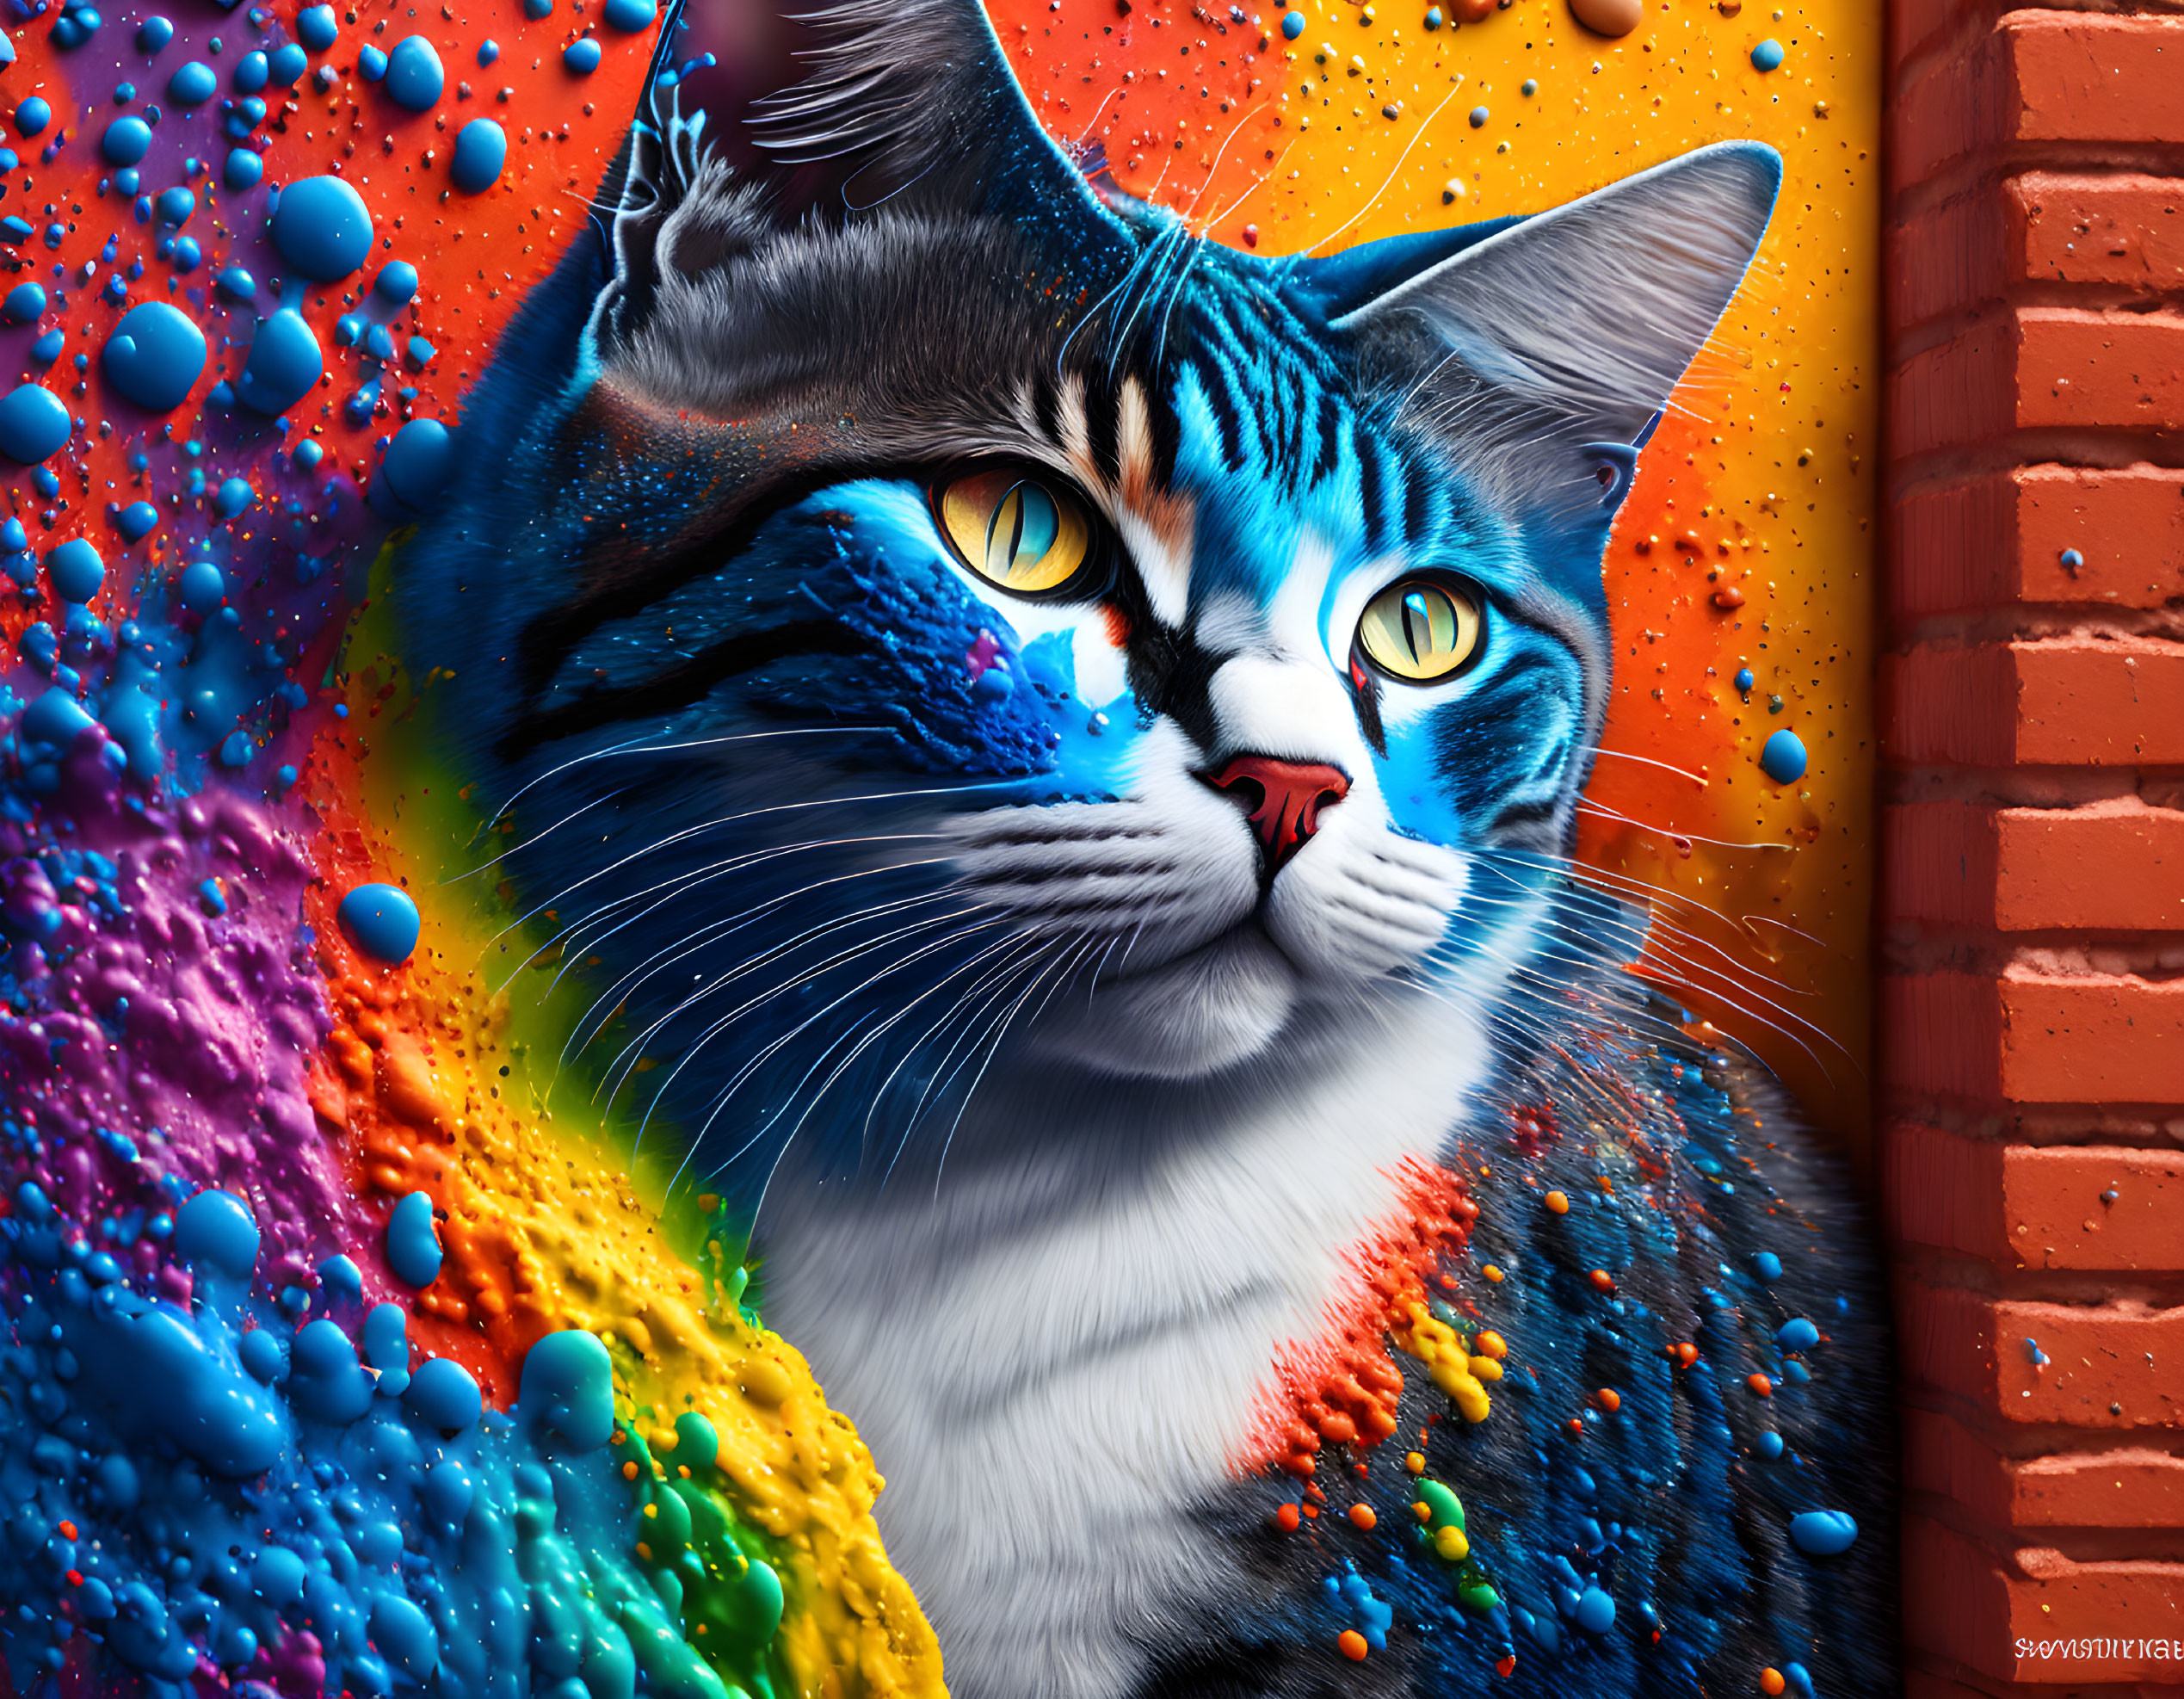 Colorful digital artwork of cat with multicolored fur on brick wall.